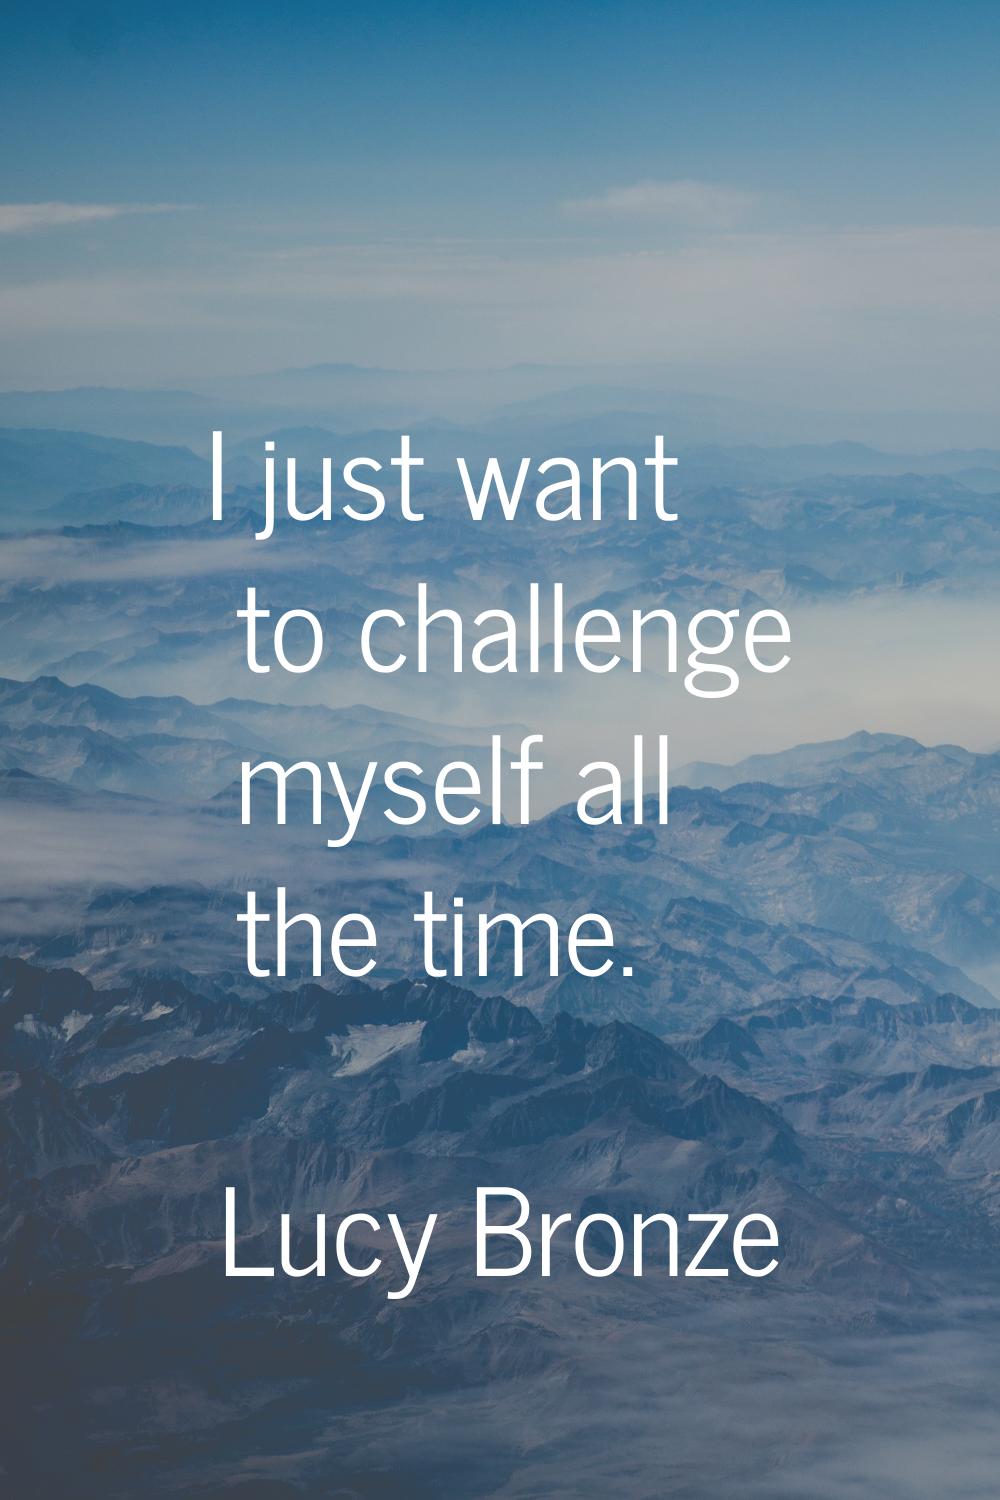 I just want to challenge myself all the time.